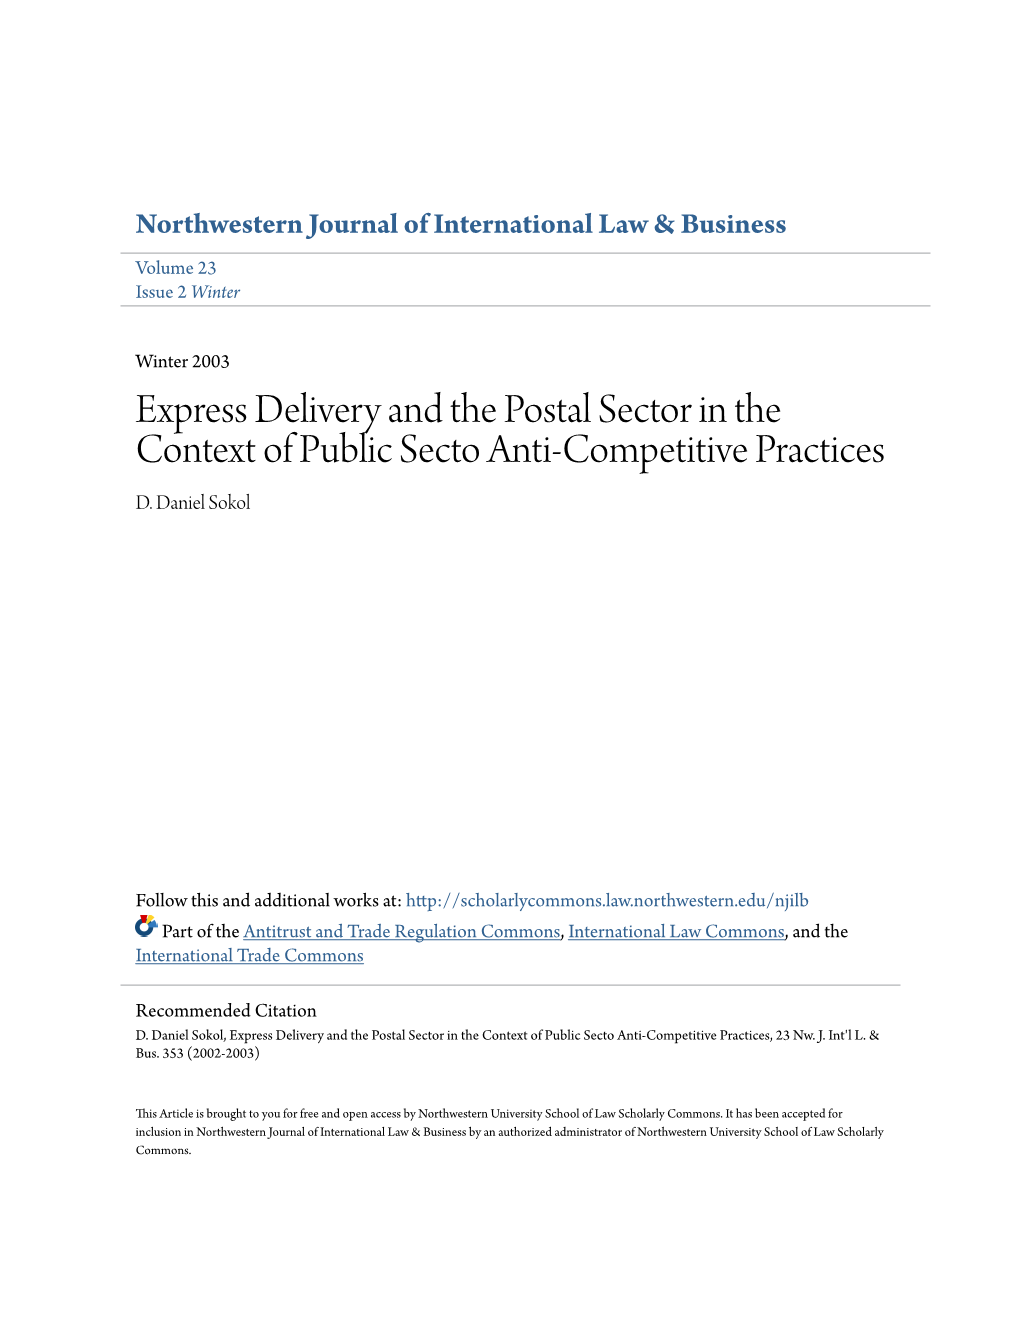 Express Delivery and the Postal Sector in the Context of Public Secto Anti-Competitive Practices D